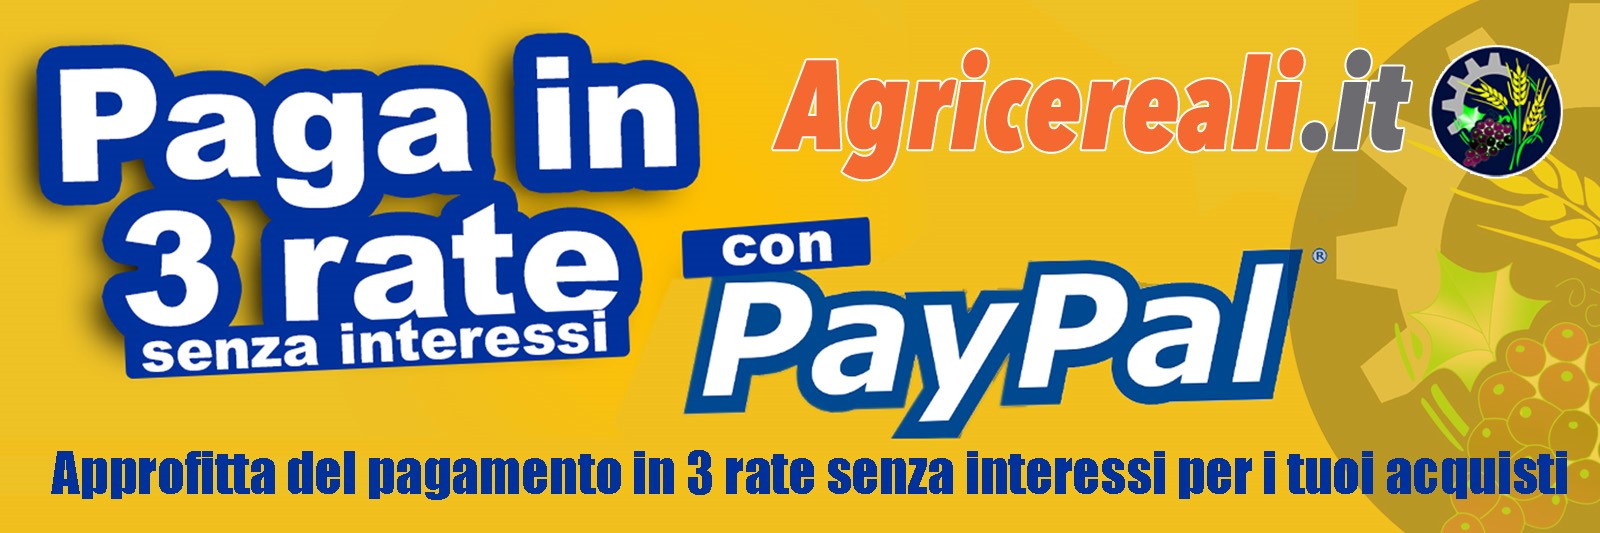 paypal3rate